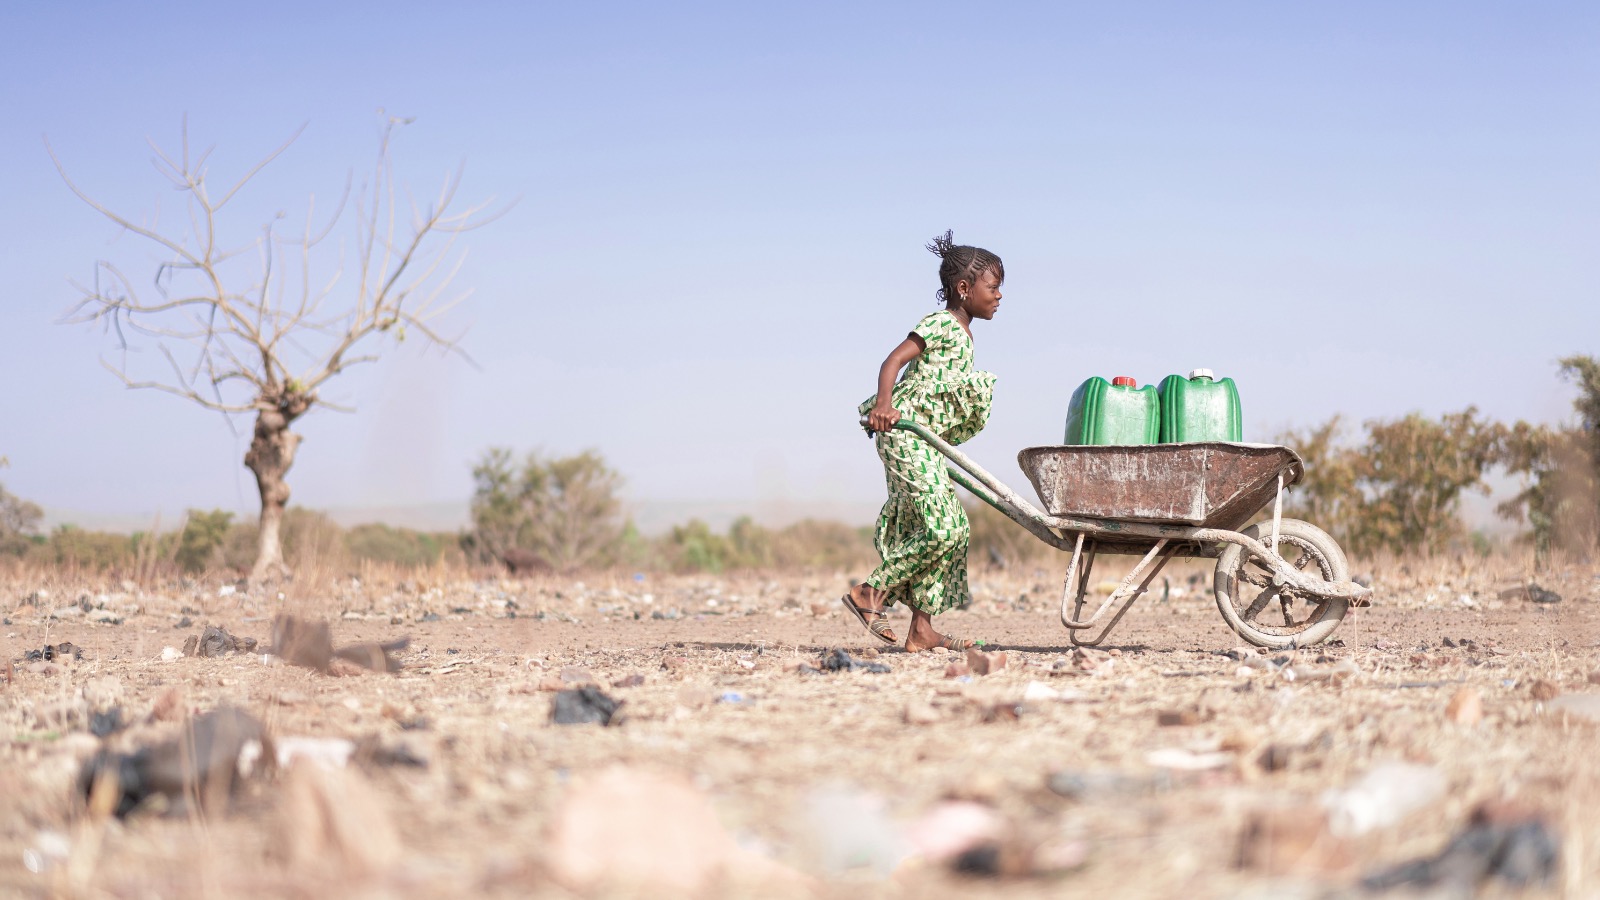 A young child carries a wheelbarrow with two water cans across a parched landscape.